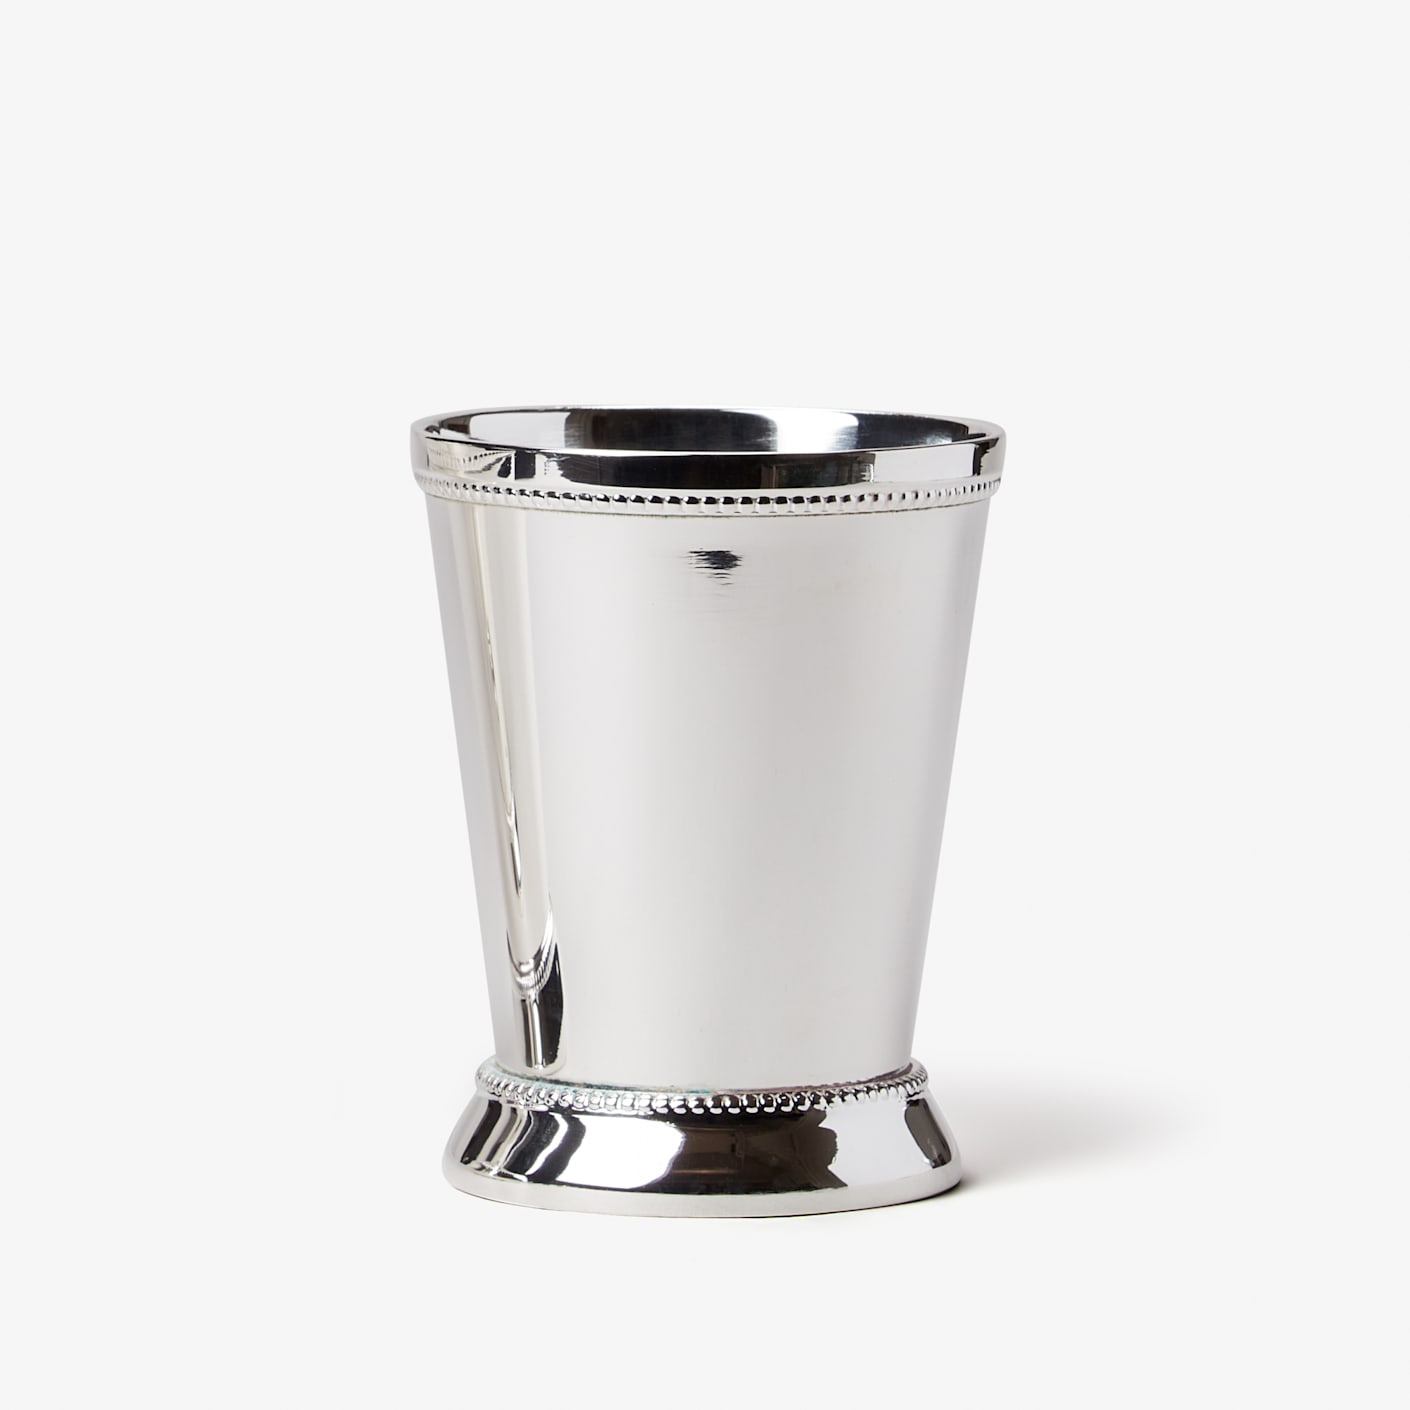 Sterling Silver Tall Mint Julep Cup - S.R. Blackinton